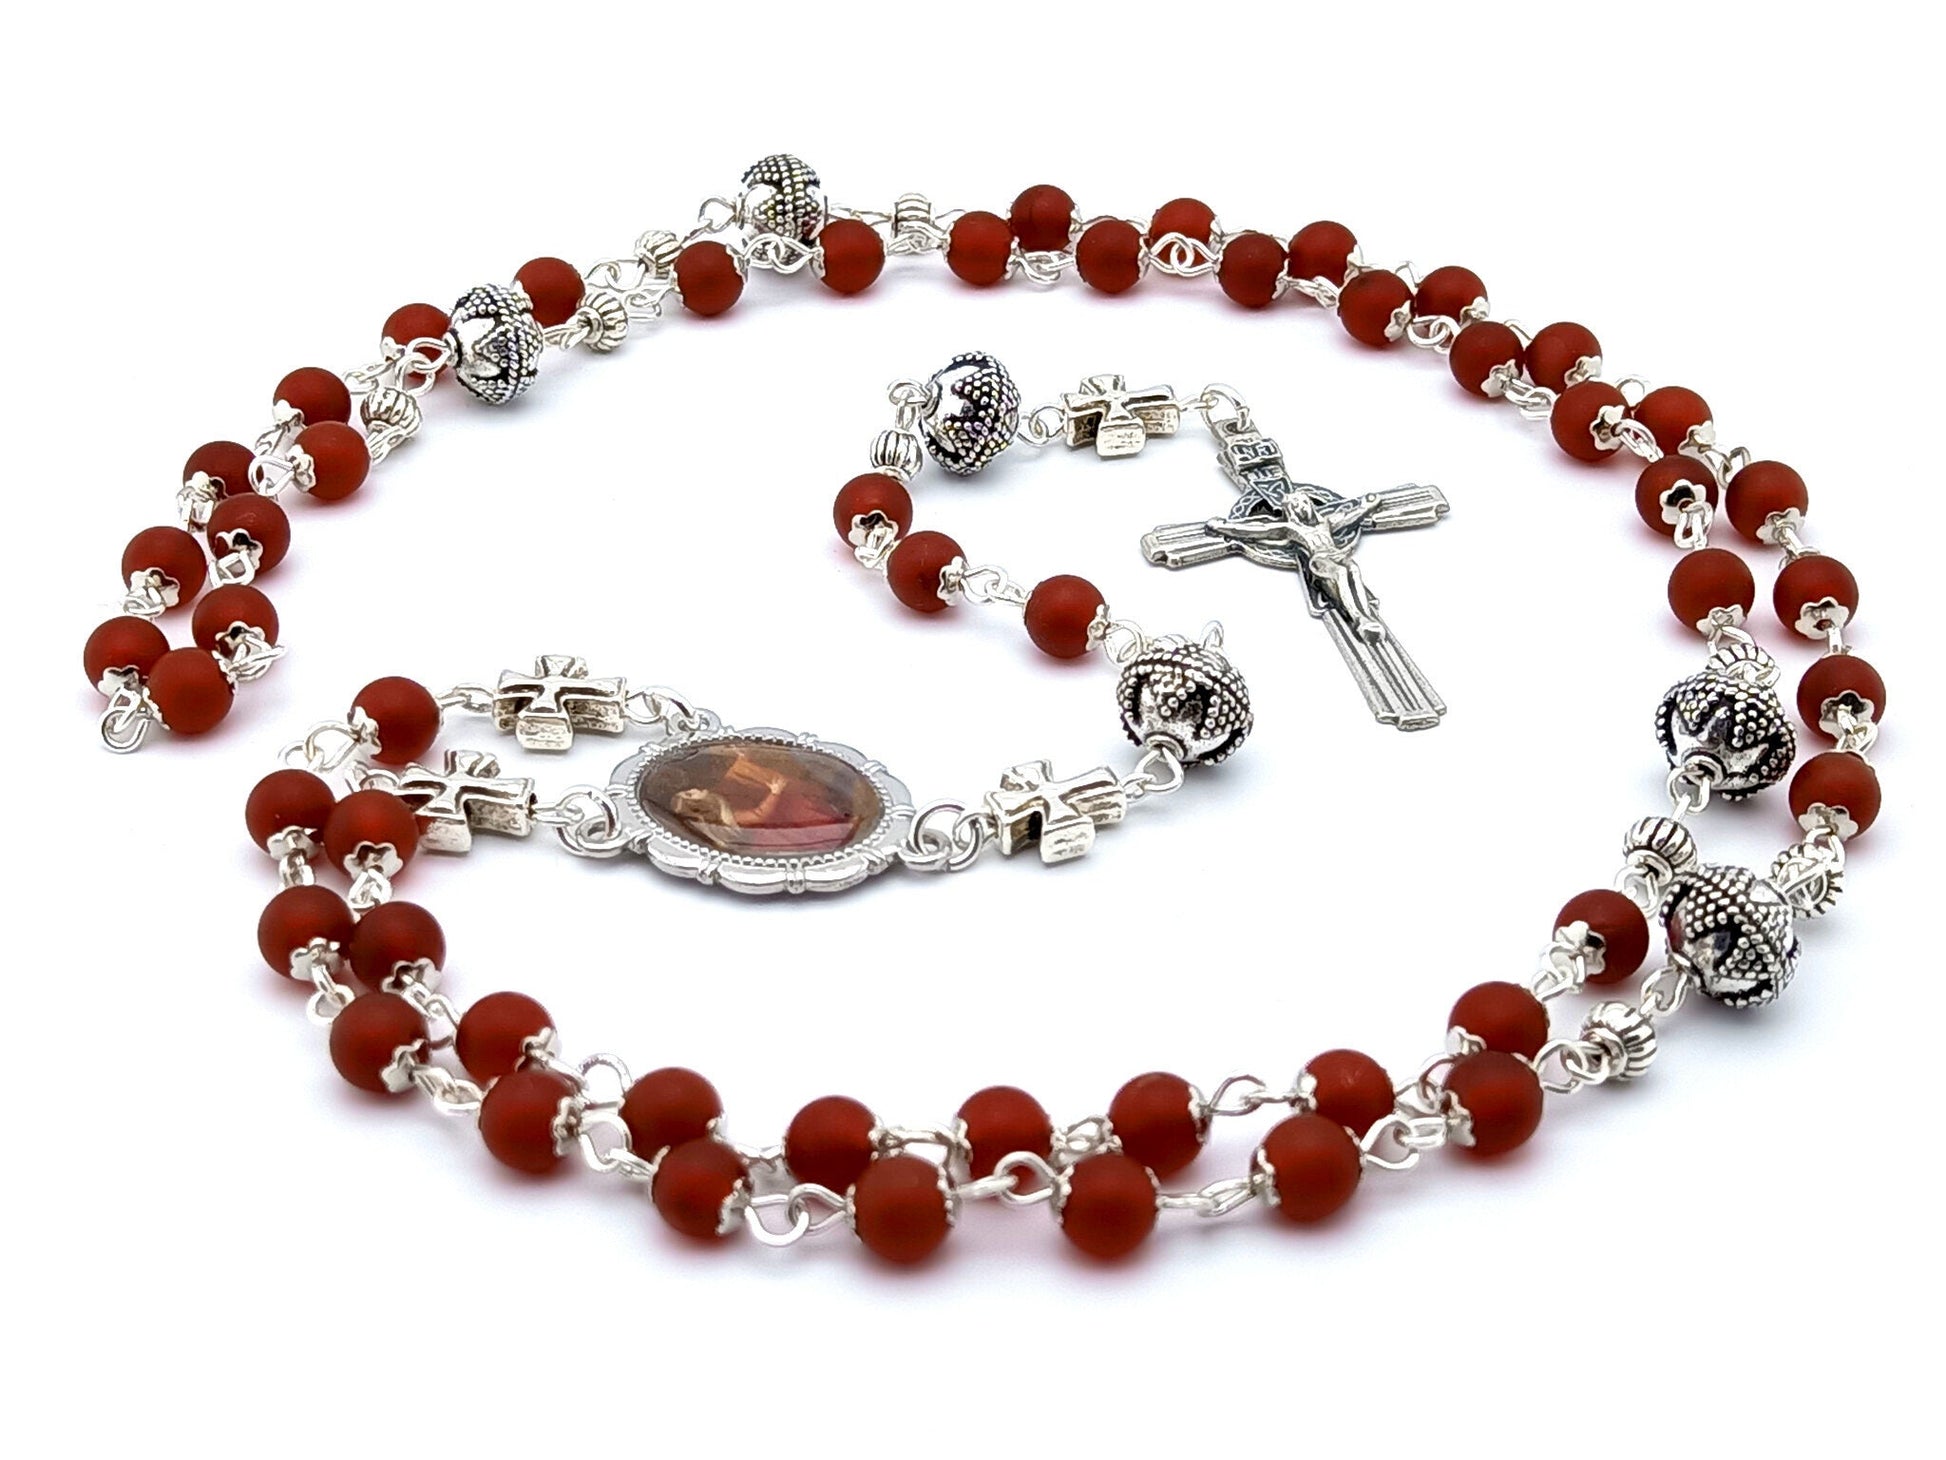 Saint Mary Magdalene unique rosary beads with red agate gemstone beads, silver pater beads, crucifix and picture centre medal.